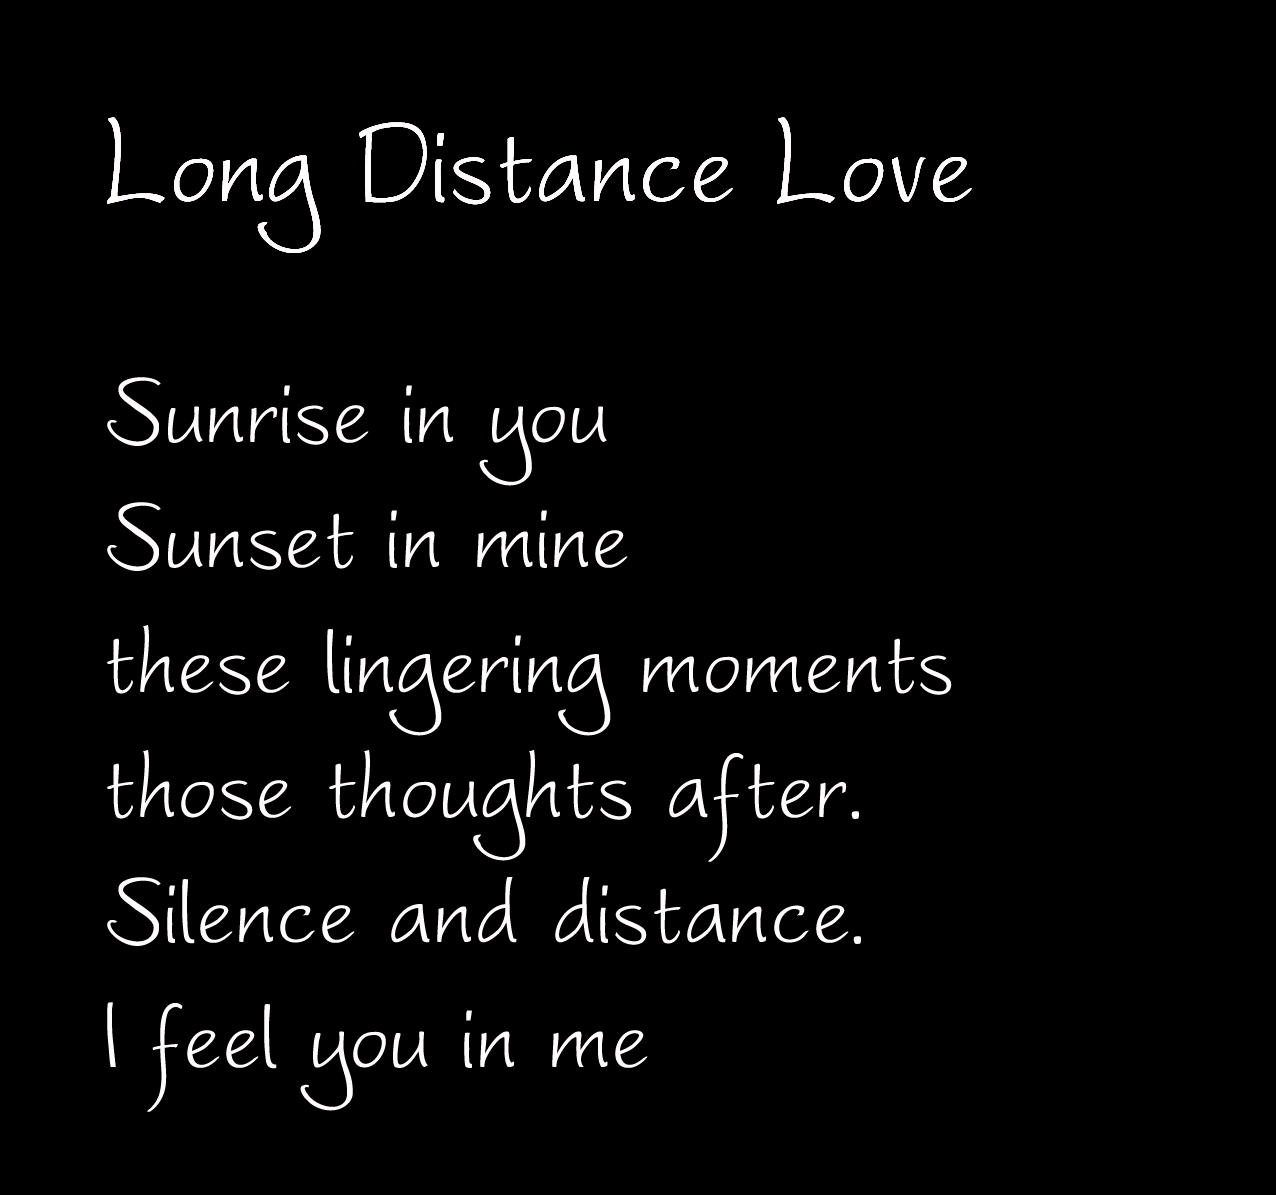 Long Distance Love Quotes Funny. QuotesGram